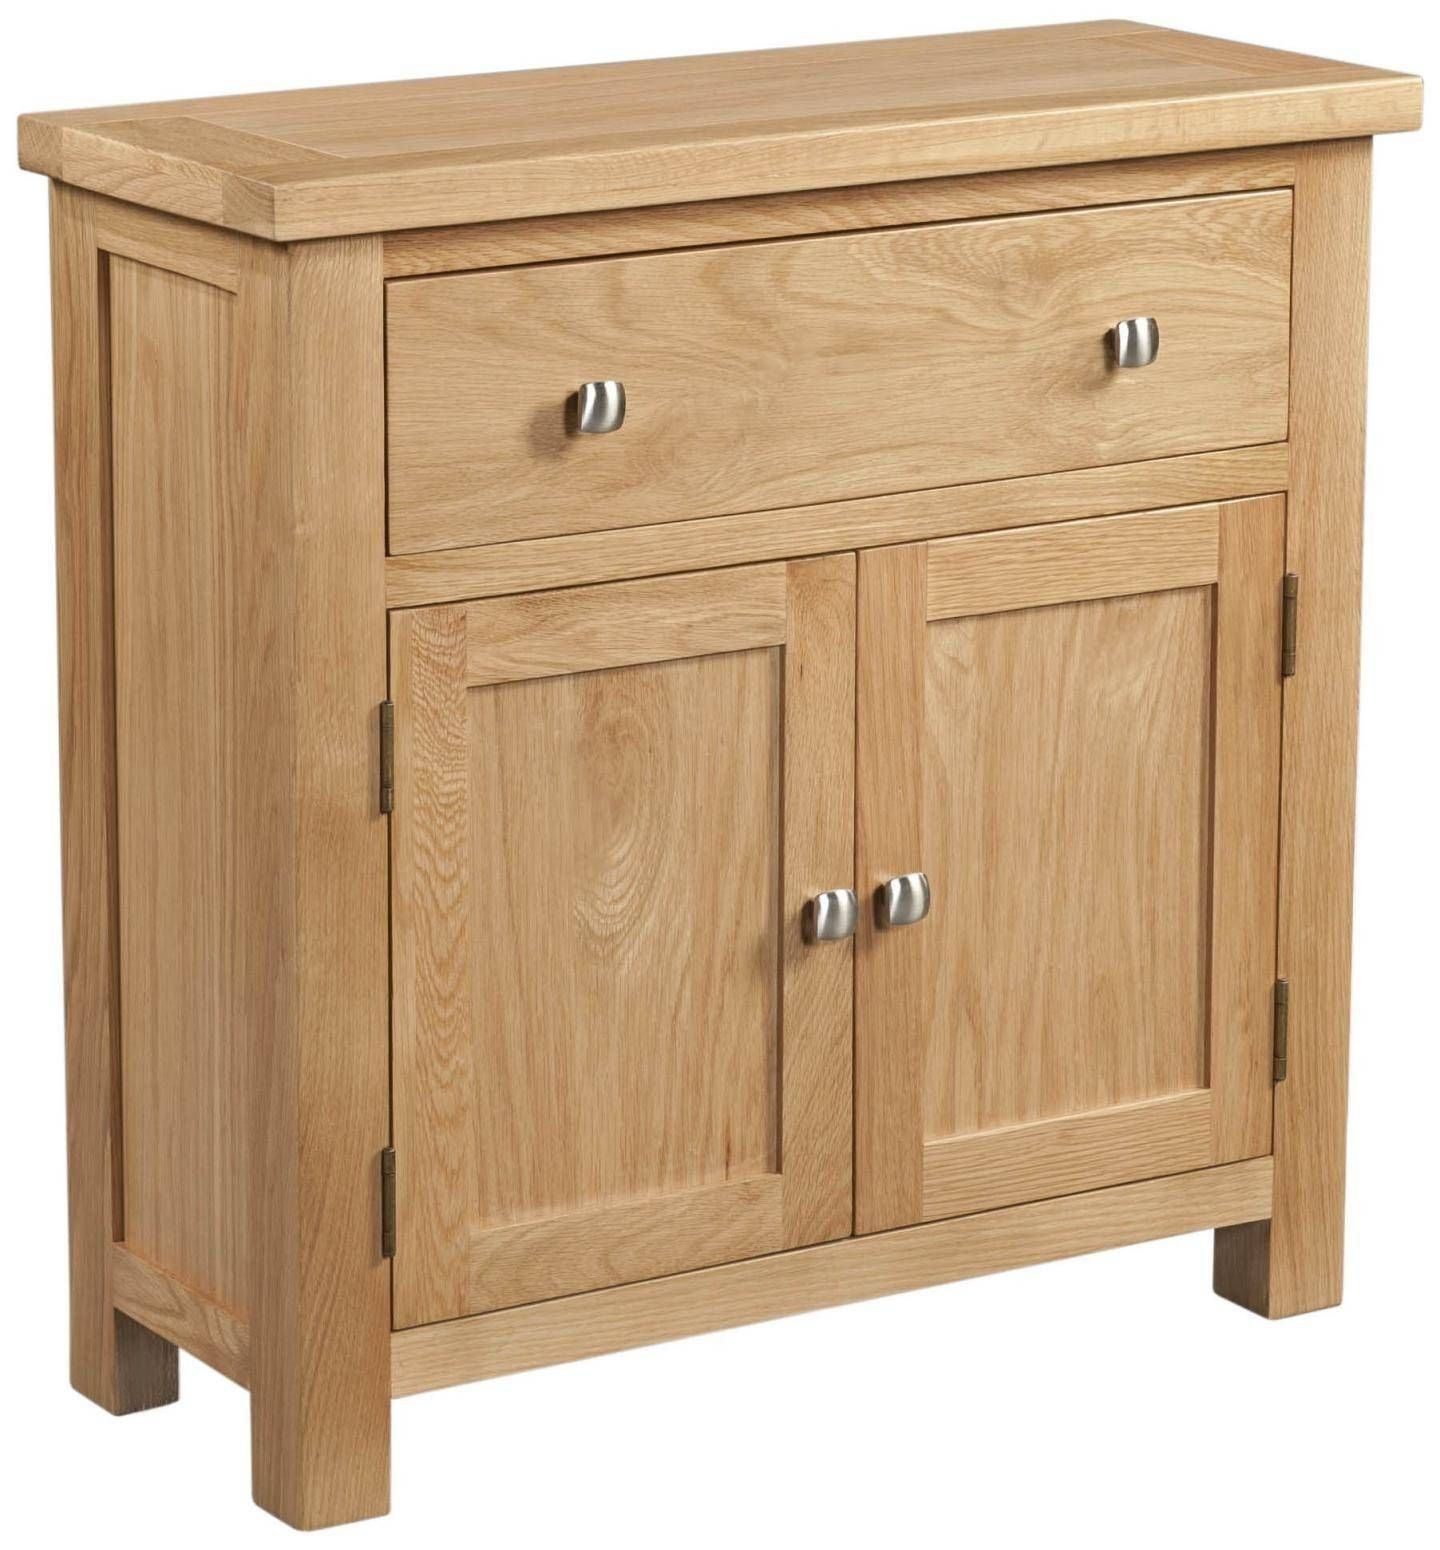 Lovely Pine & Oak Sideboards | Willoby's Furniture Swindon, Wiltshire Pertaining To Most Current Wooden Sideboards For Sale (View 4 of 15)